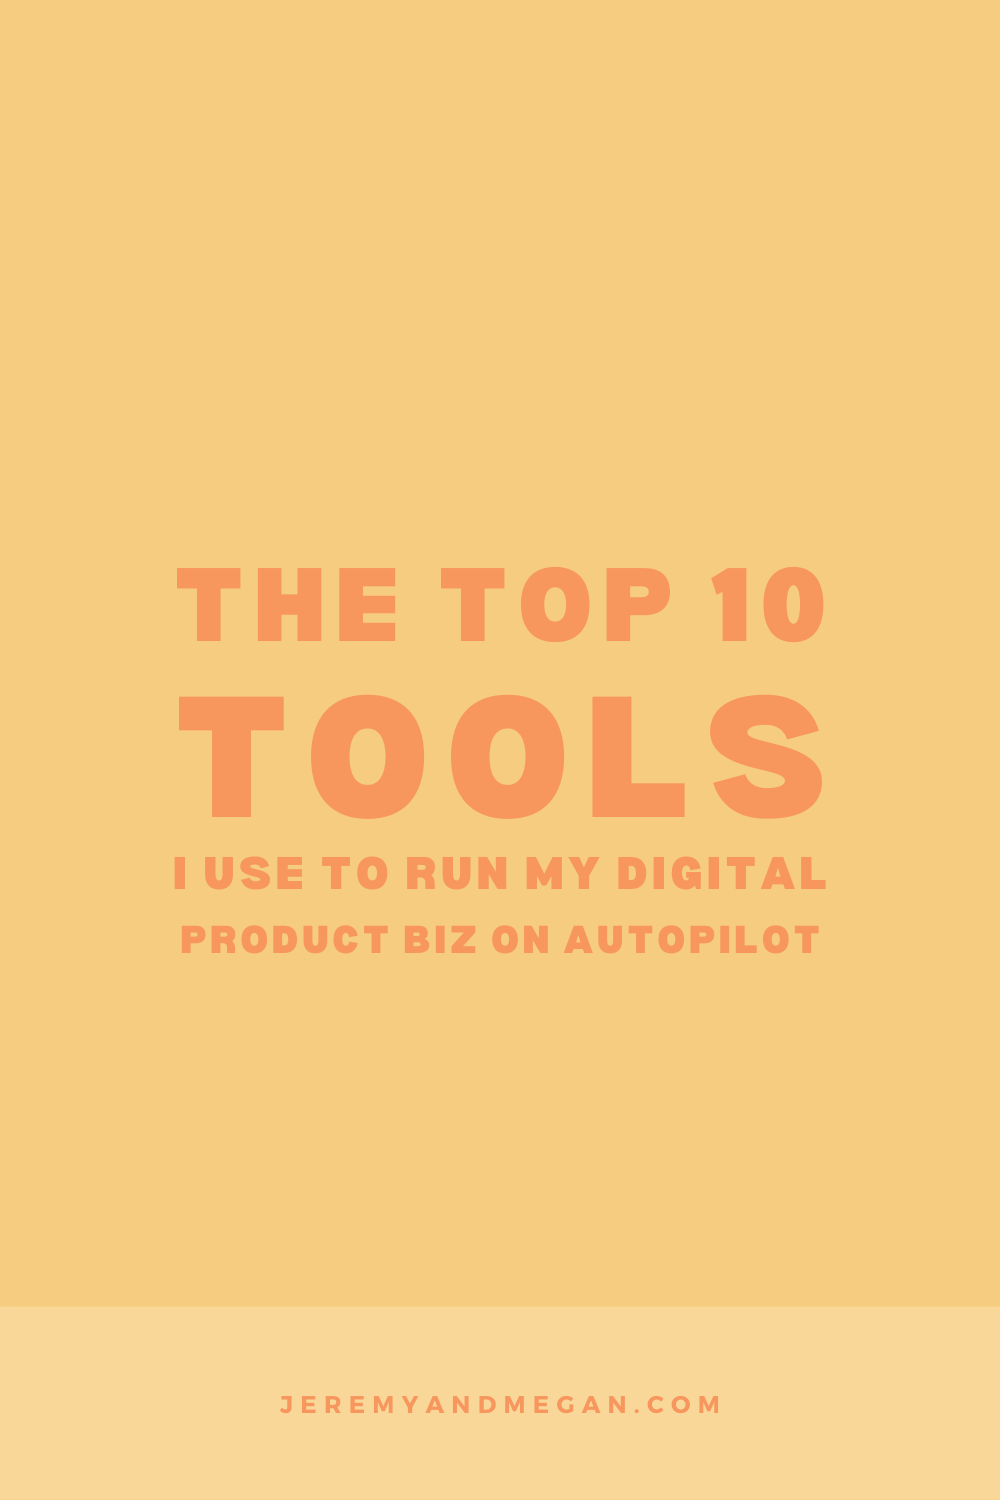 The top 10 tools I use to run my digital product business on autopilot shared by Megan Martin, digital product creator